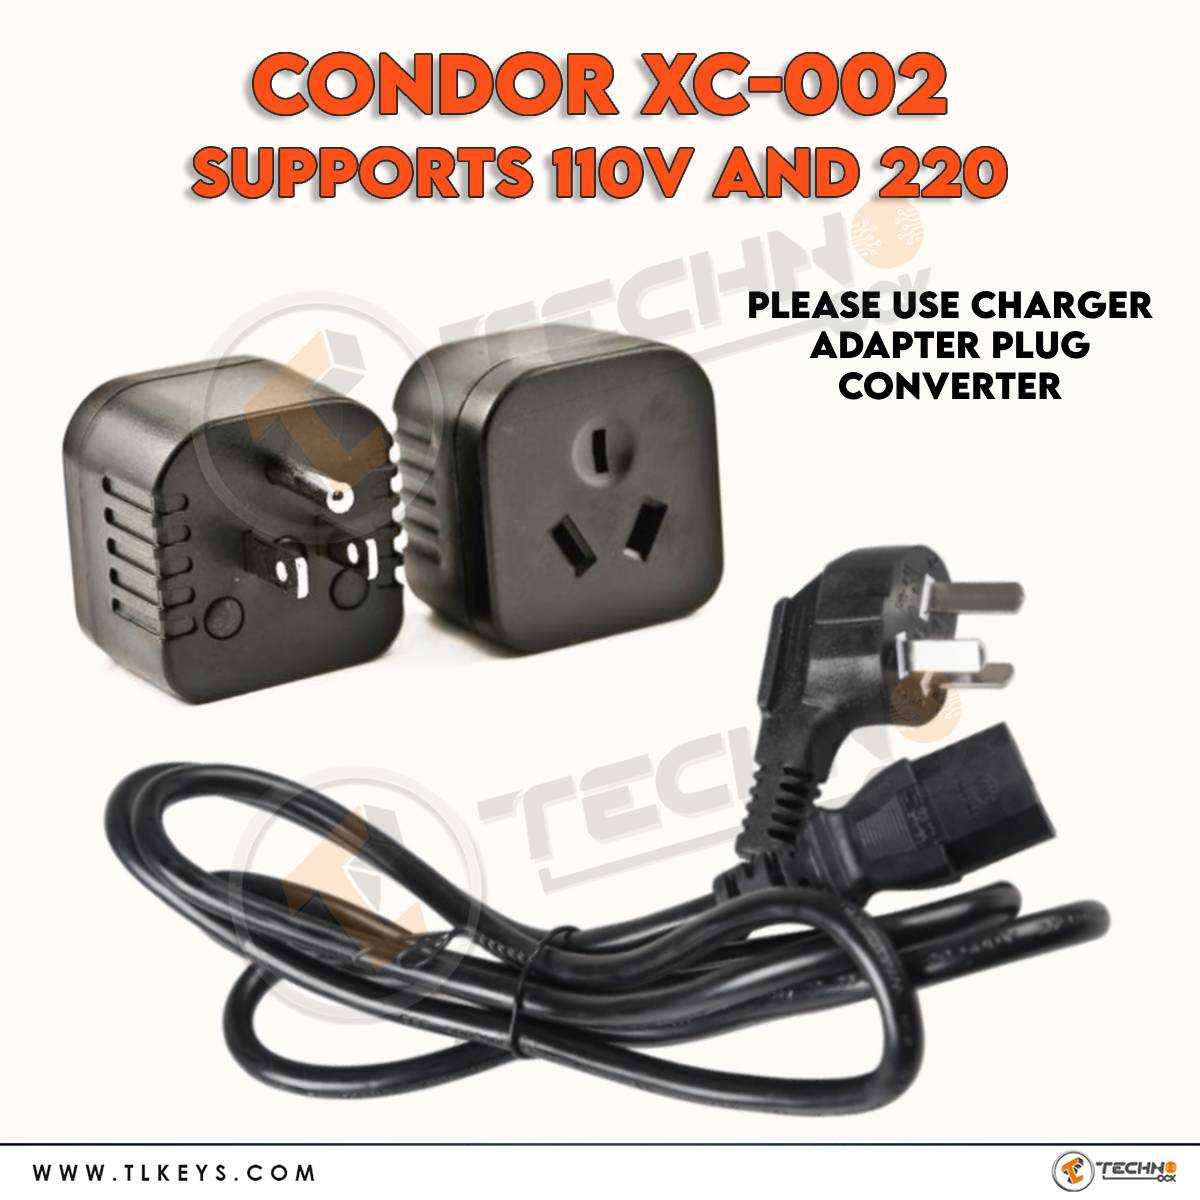  CONDOR XC-002 supports 110V and 220